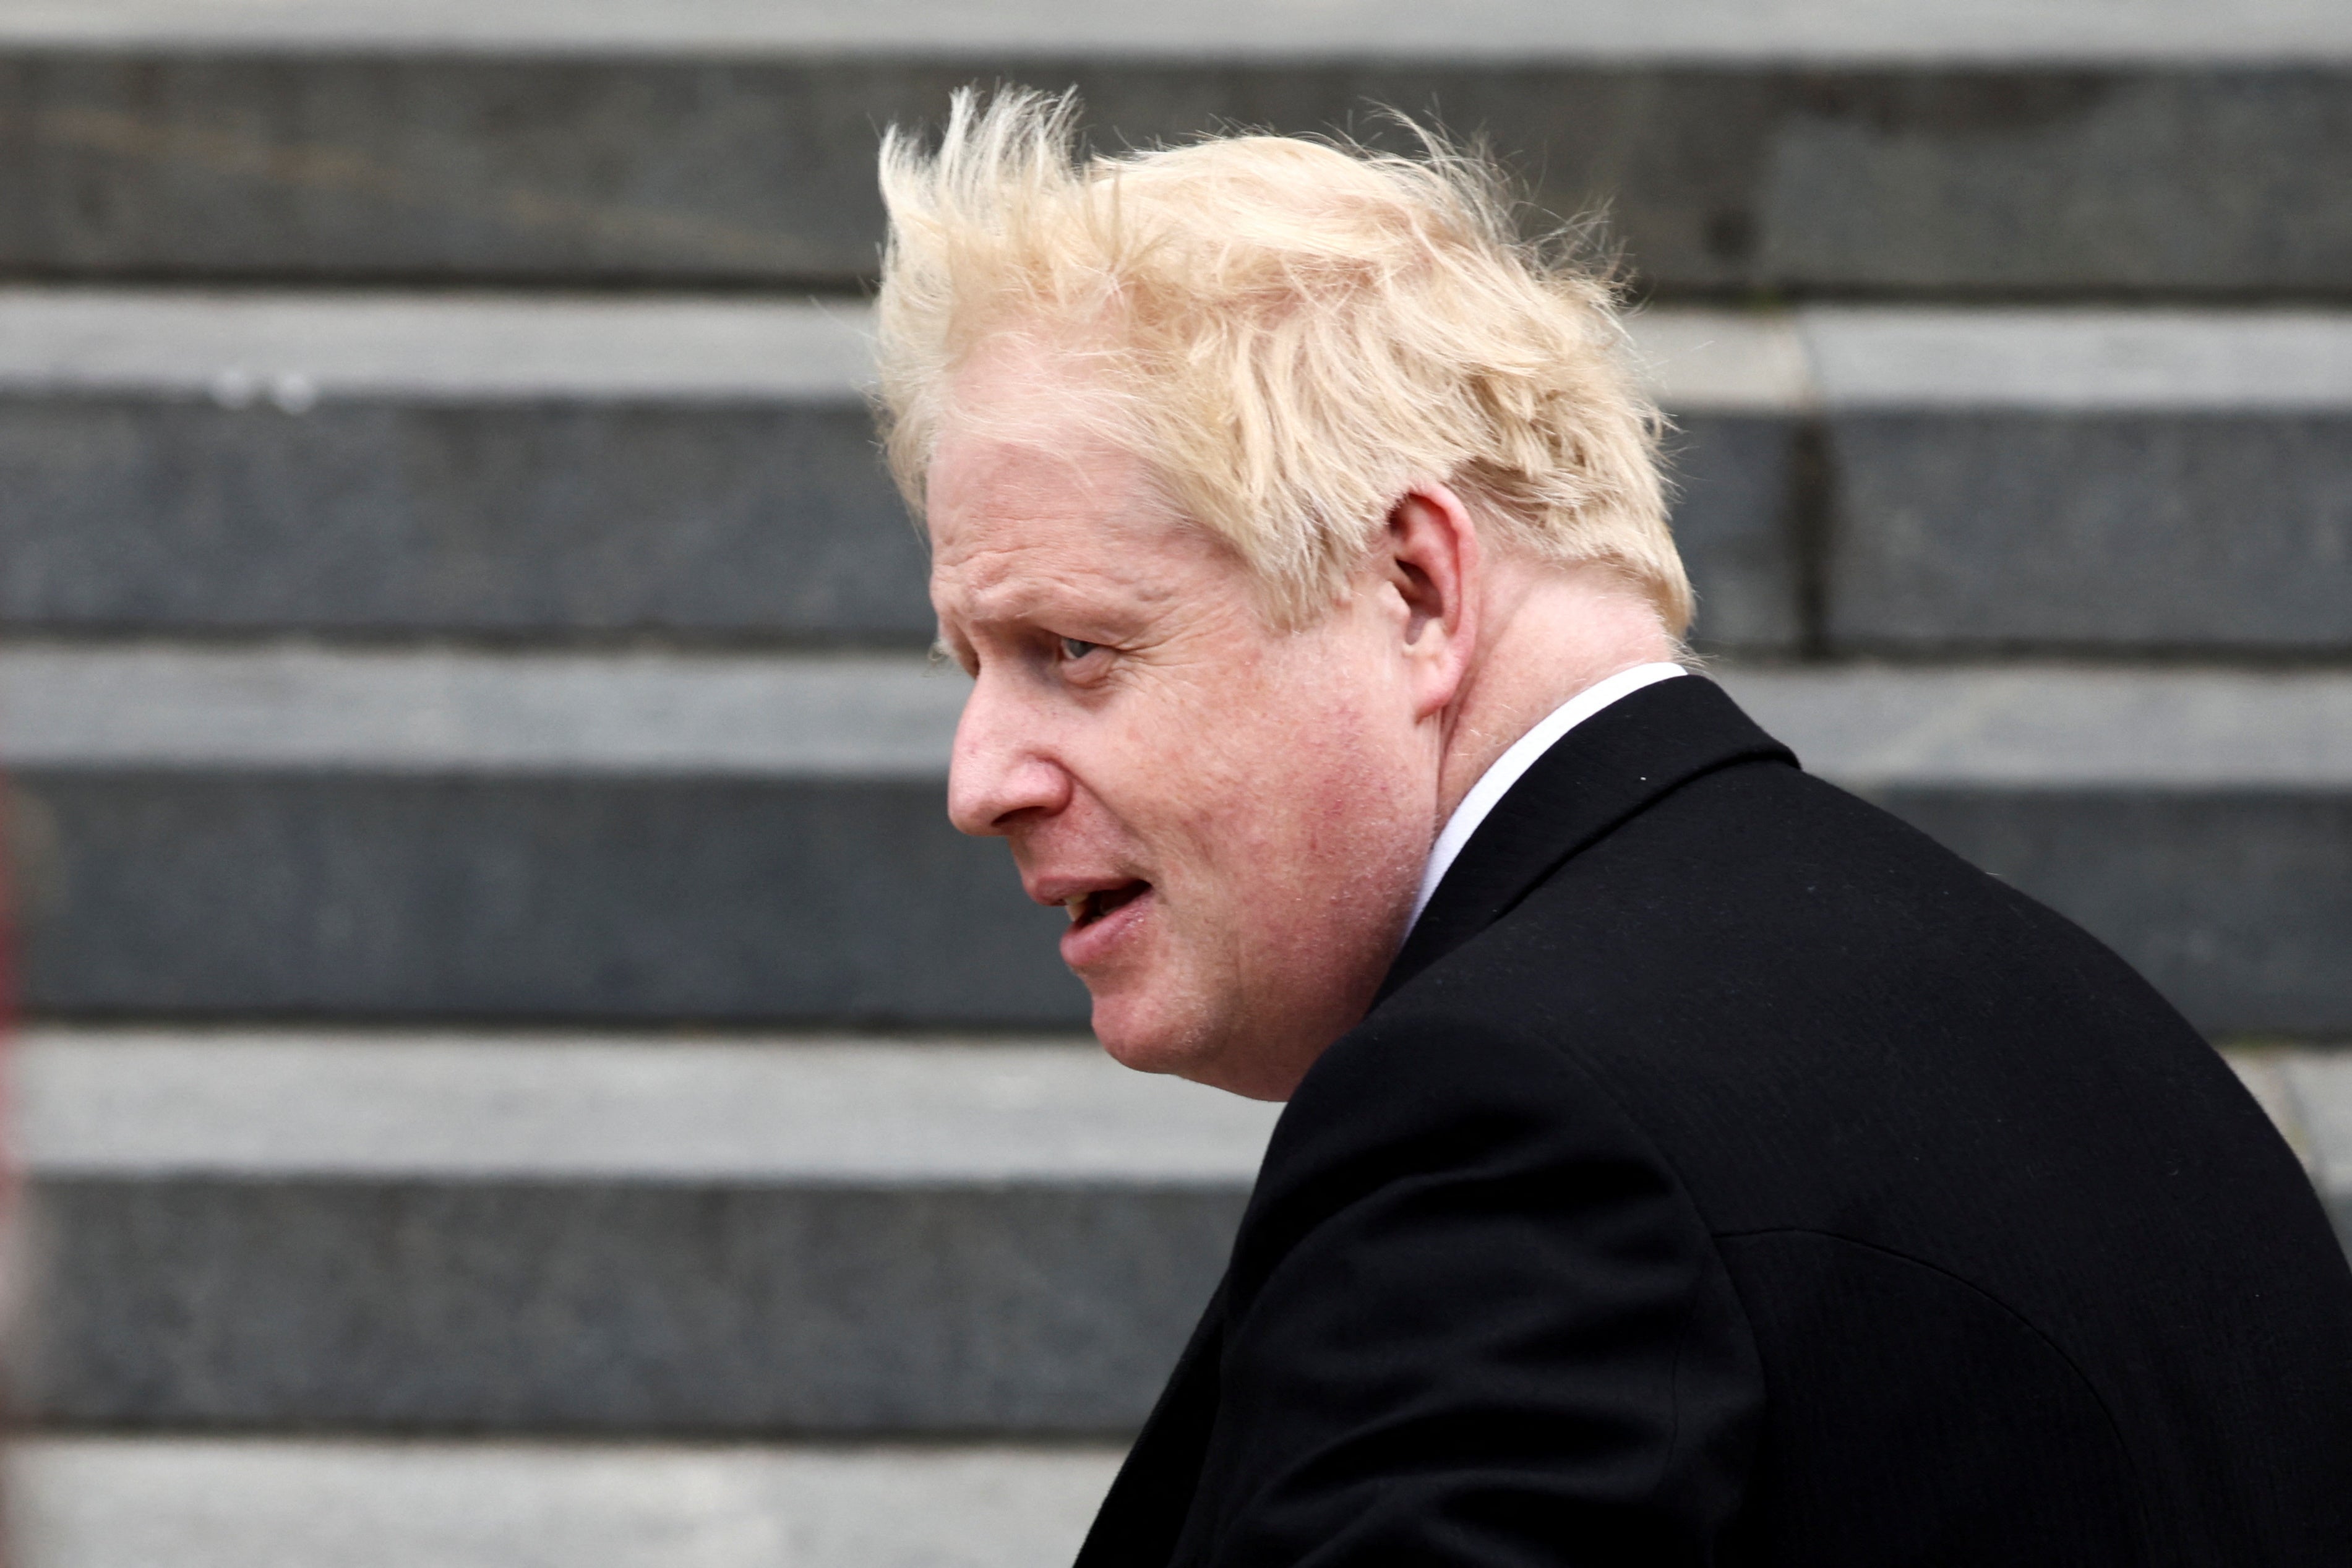 Boris Johnson is set to meet his Cabinet on Tuesday as he seeks to keep his premiership afloat by putting a bruising confidence ballot firmly behind him (Henry Nicholls/PA)